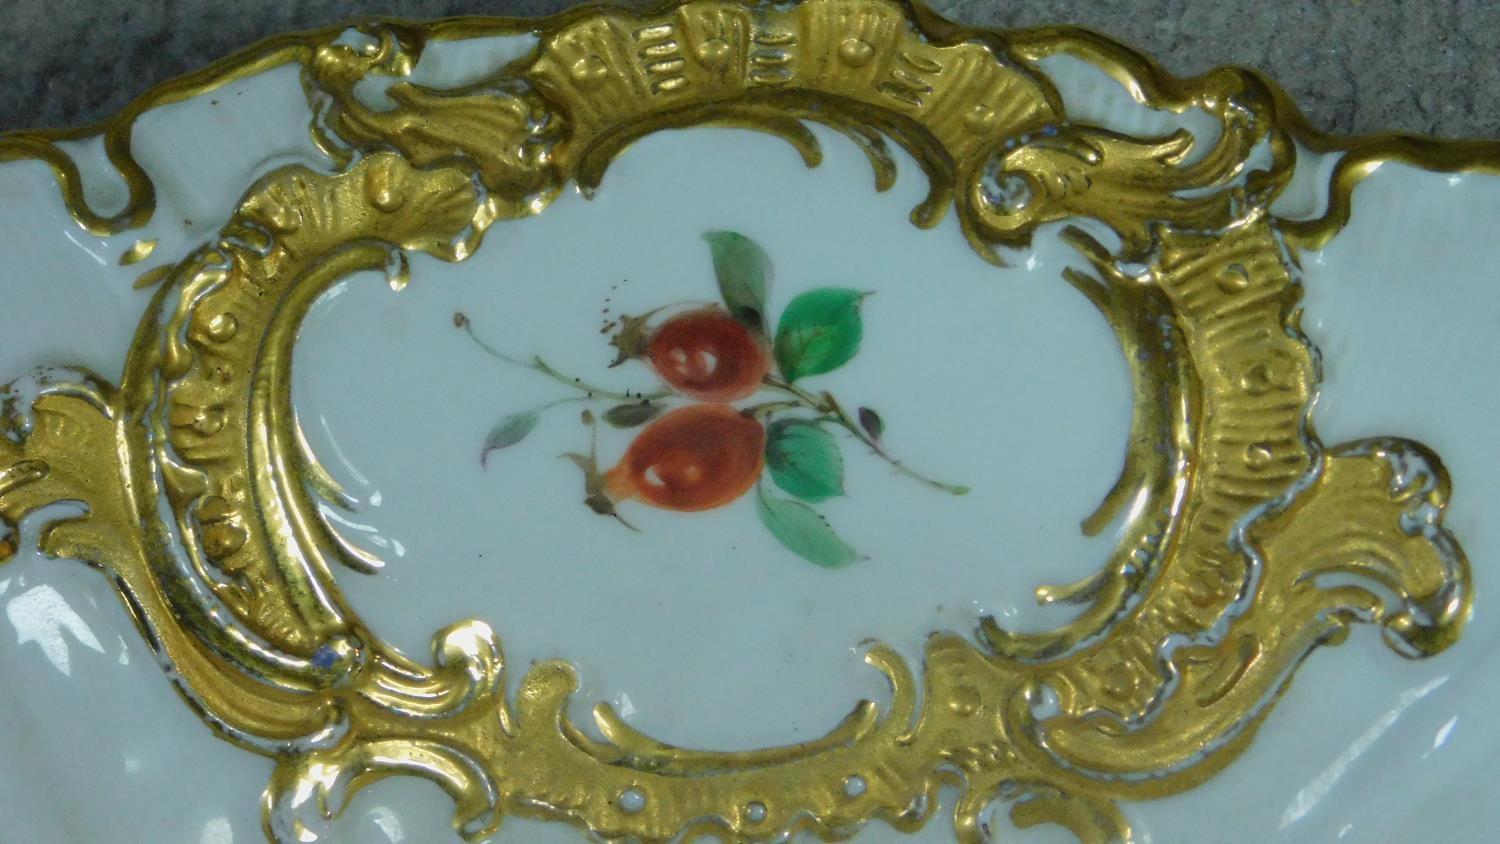 A Meissen handpainted and gilded fruit plate, with central cartouche depicting a lemon, plum, - Image 5 of 6